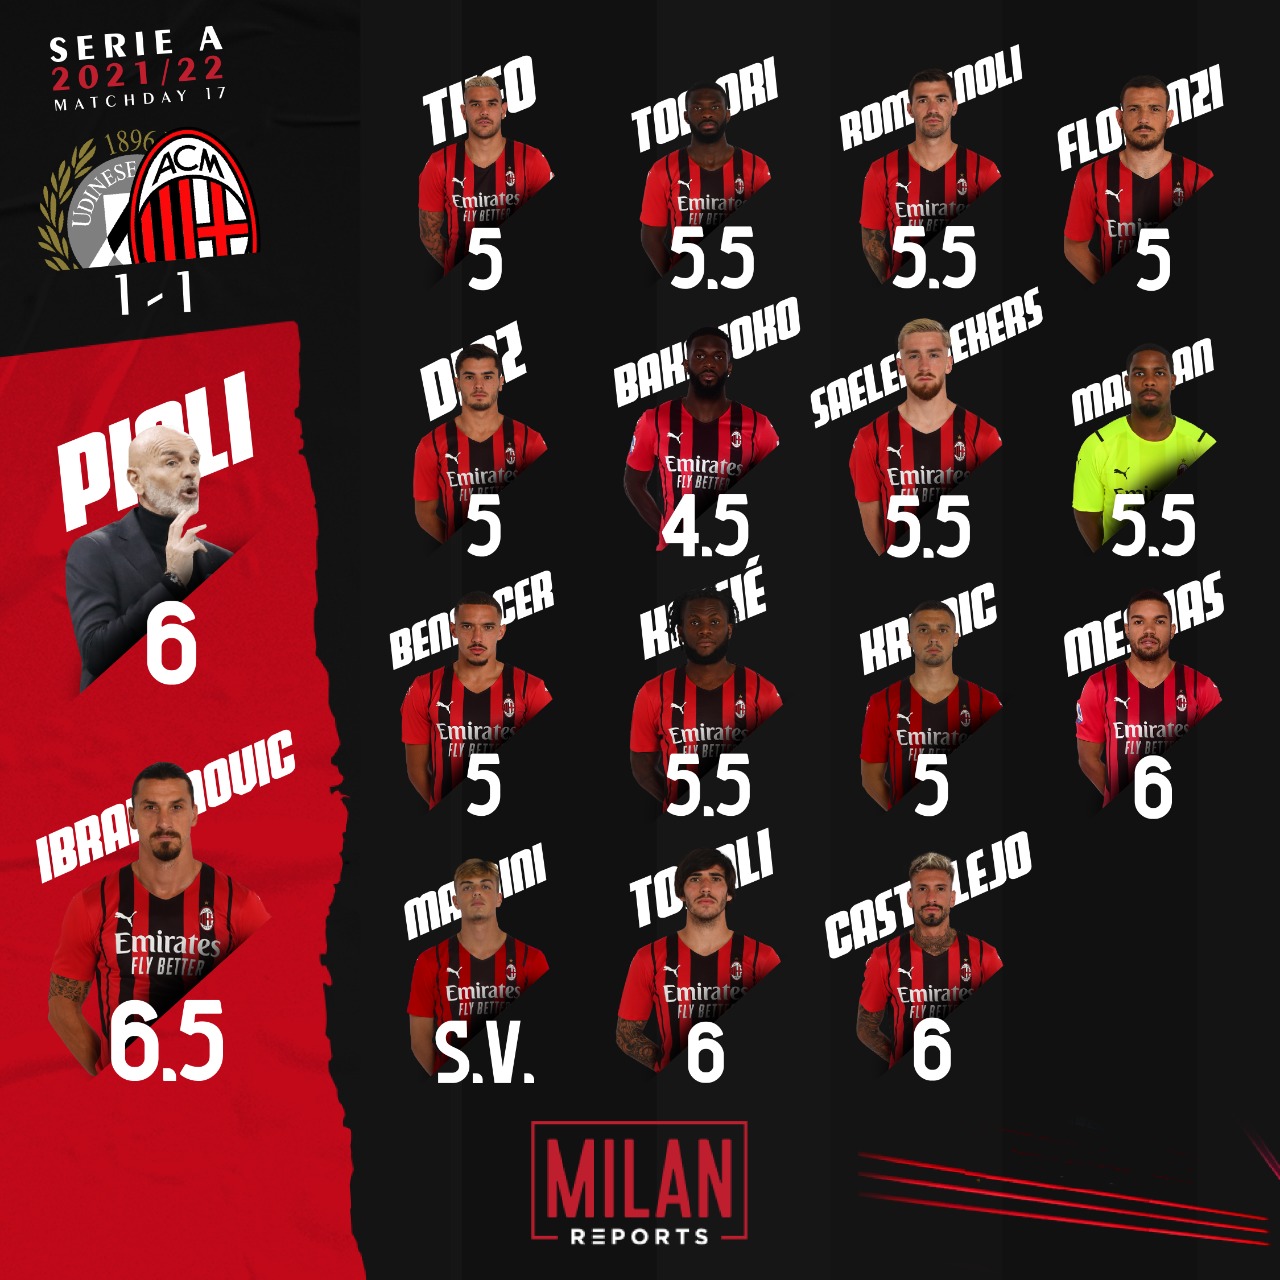 AC Milan players ratings vs Udinese 11/12/2021